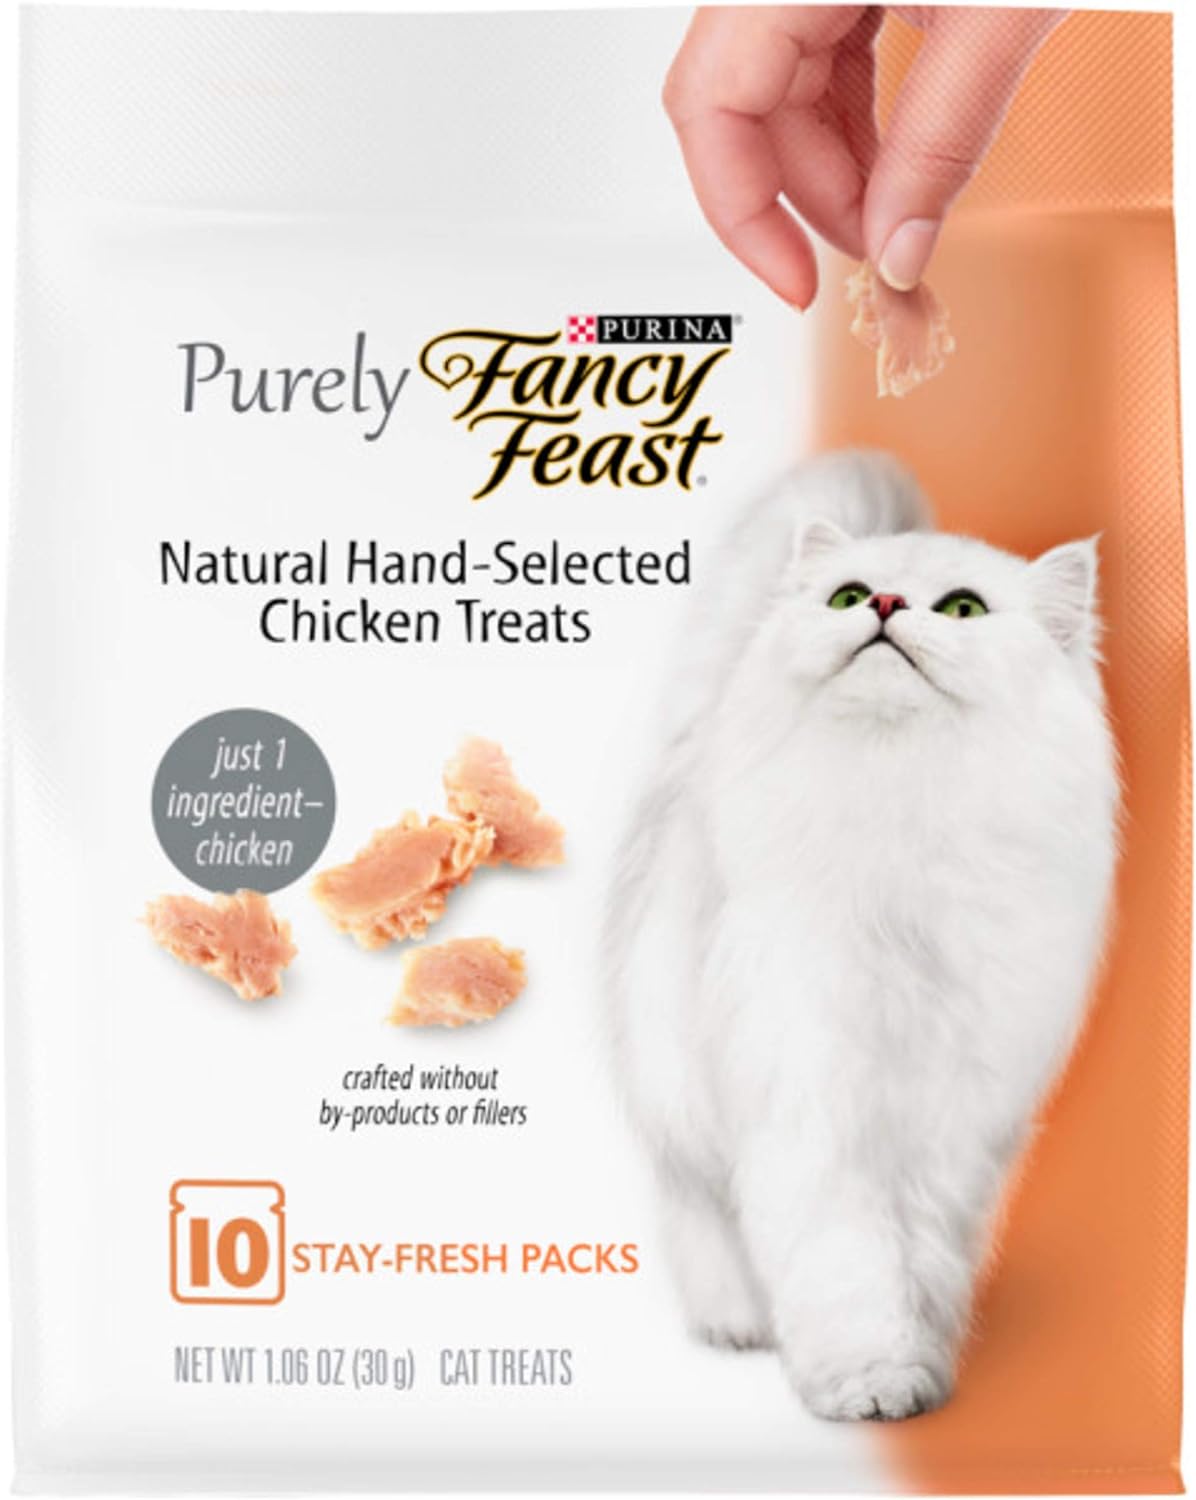 Purina Fancy Feast Natural Cat Treats, Purely Natural Hand-Selected Chicken - (Pack of 5) 10 ct. Pouches